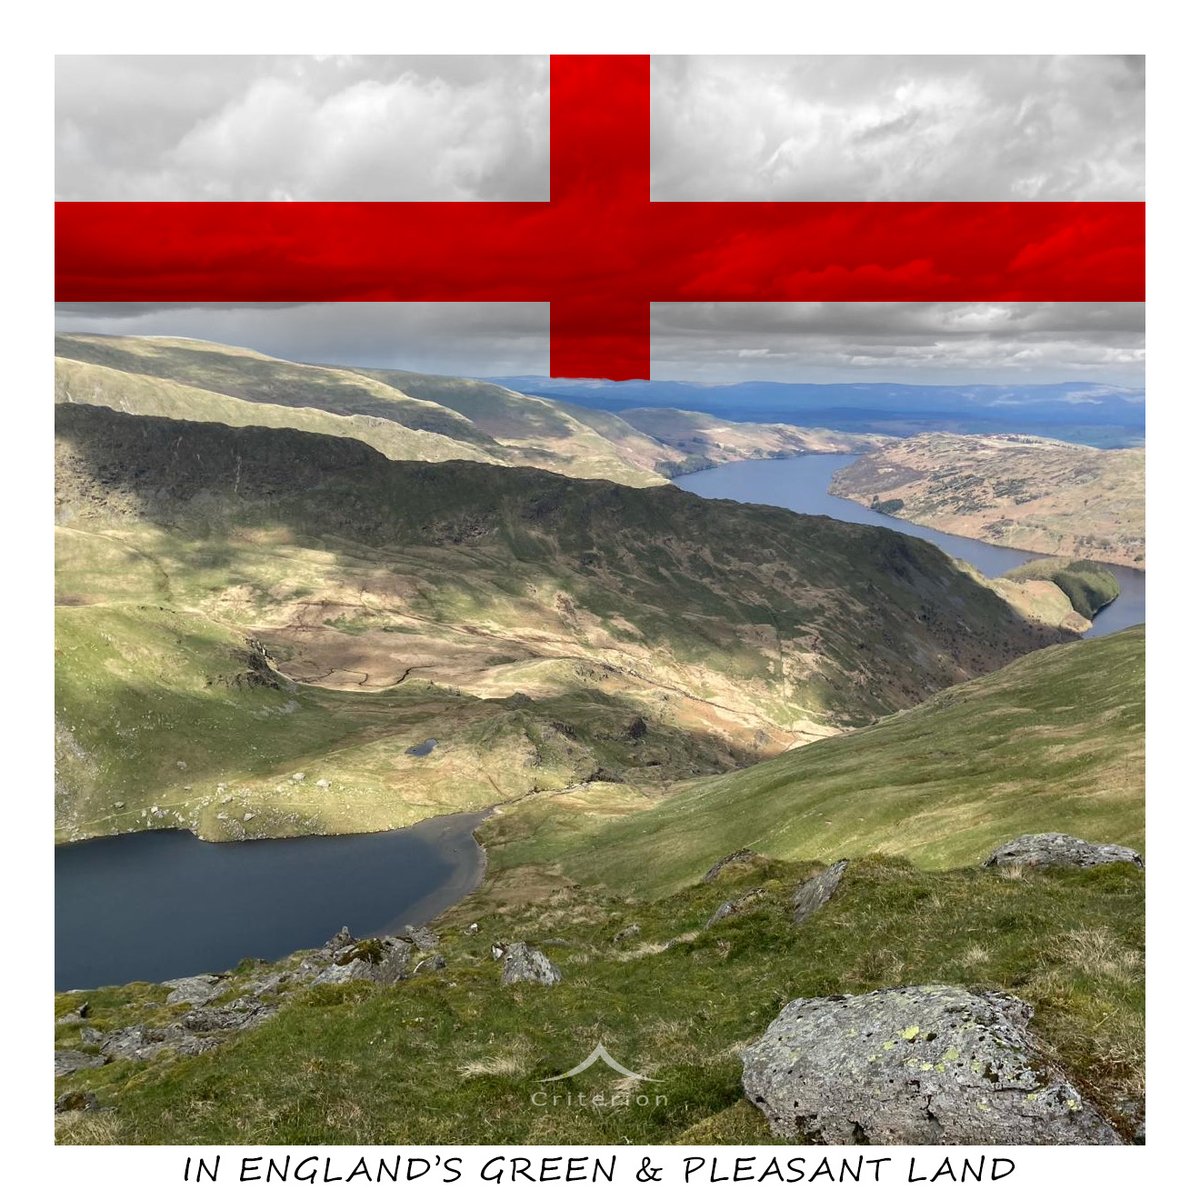 Happy St. George's Day everyone. I am happy to say that I am a proud Englishman. I've put this image on my sleeping bag business social media accounts and I hope one day to be able to manufacture in the UK. #stgeorge #stgeorgesday